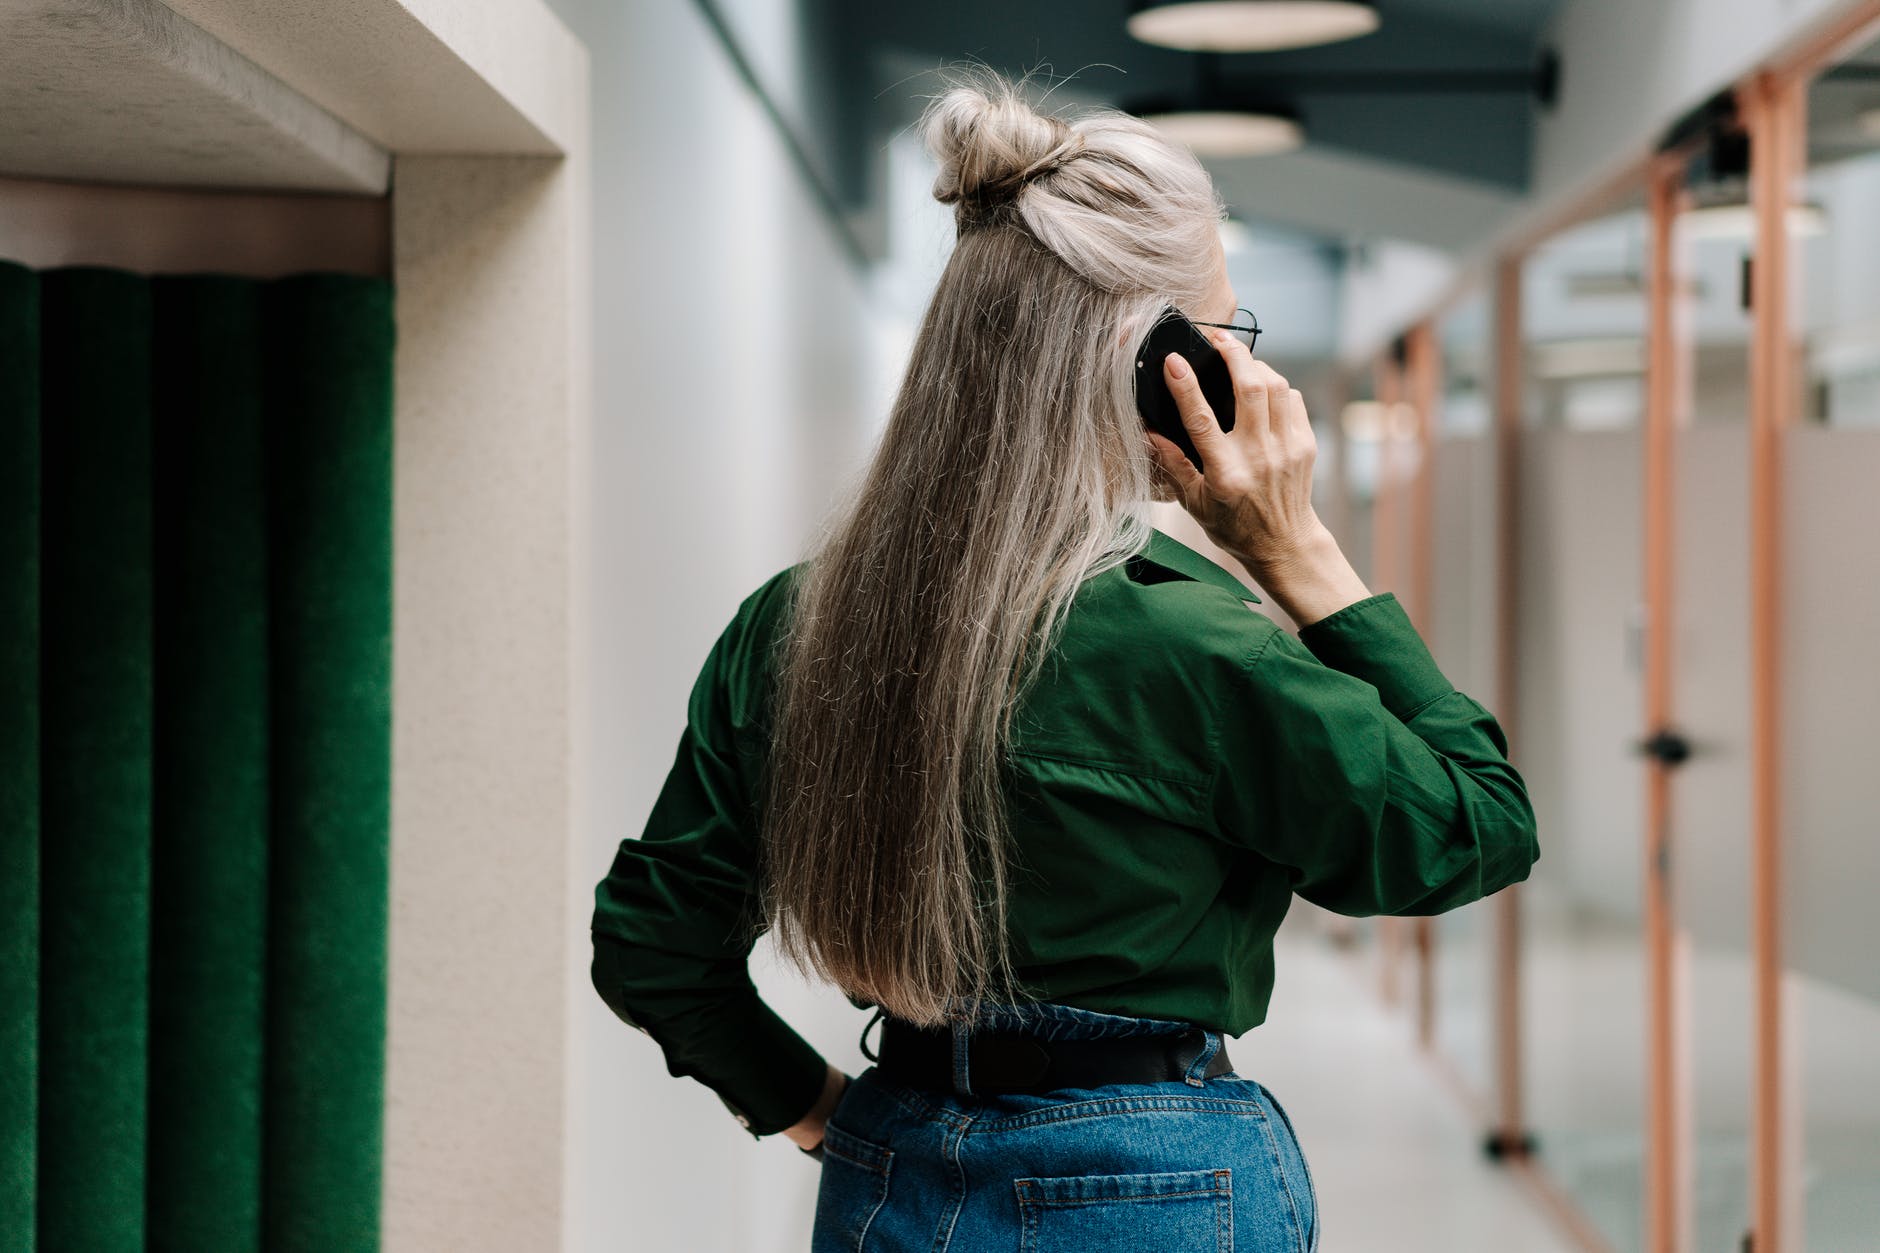 My mom called unexpectedly. | Source: Pexels